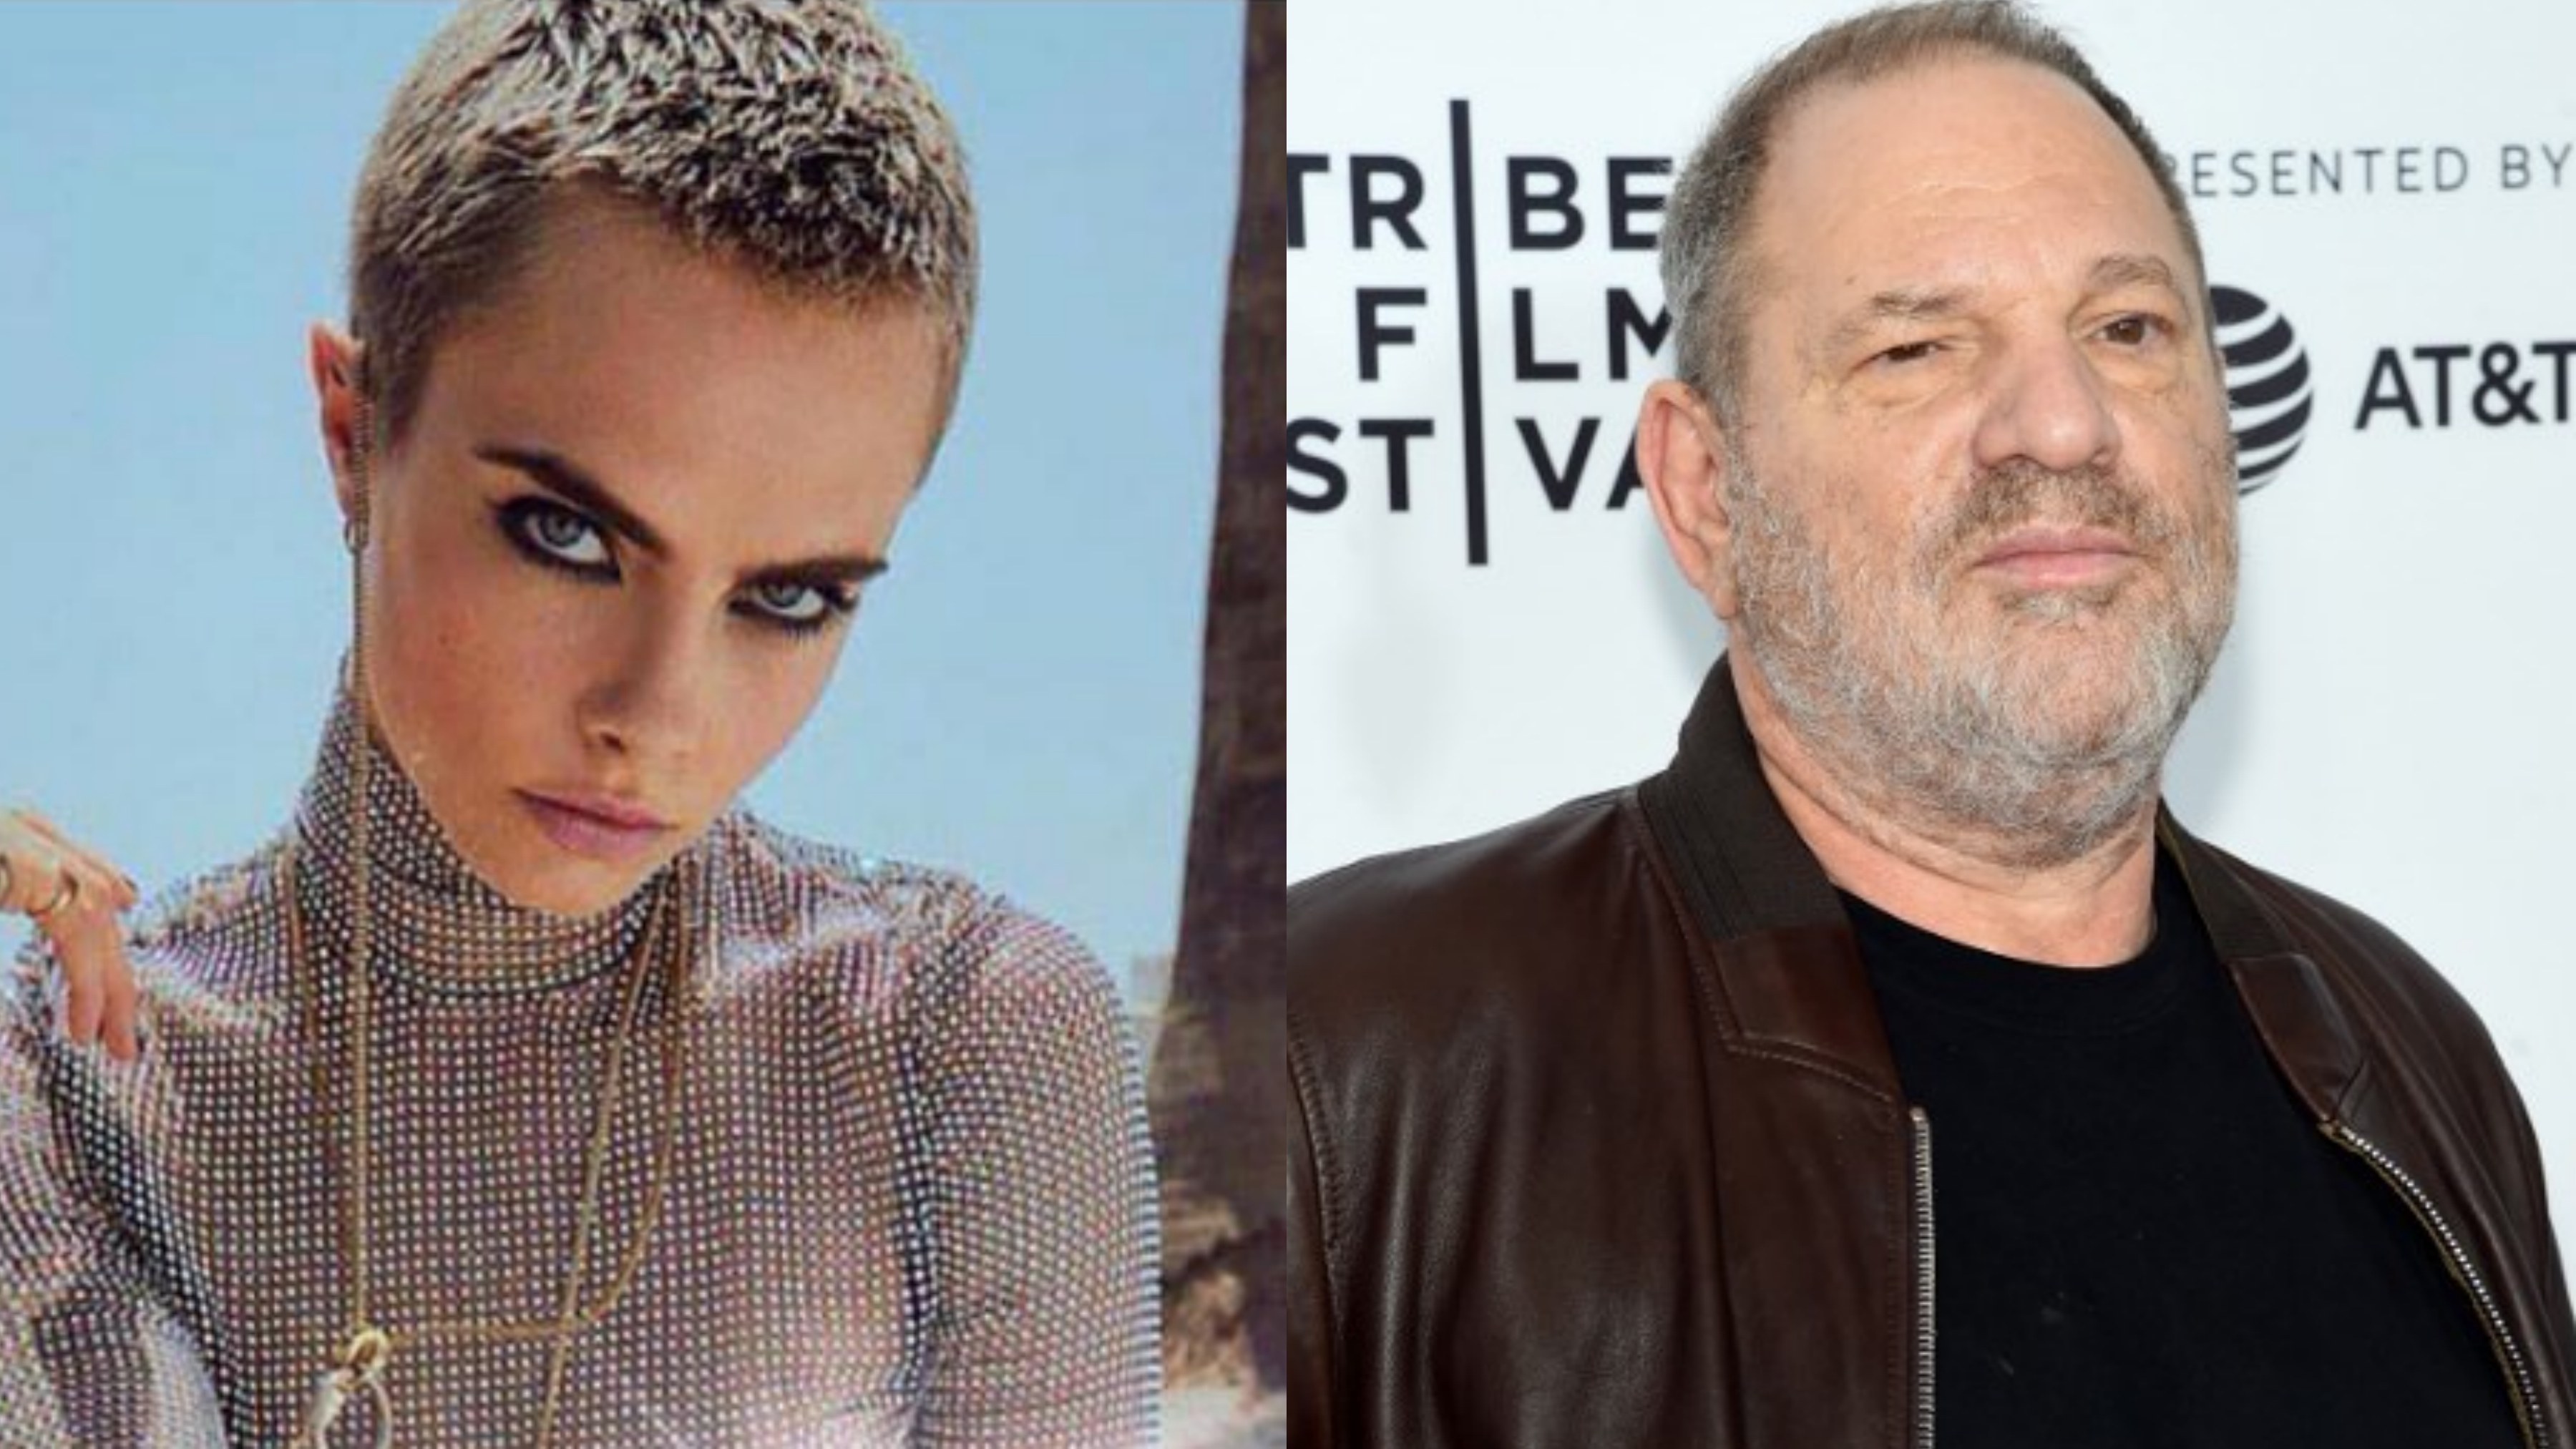 COMING FORWARD Cara Delevingne is the latest actress and model to accuse Harvey Weinstein of sexual harassment. Photos from Instagram/@caradelevingne/Jamie McCarthy/Getty Images for Tribeca Film Festival/AFP 